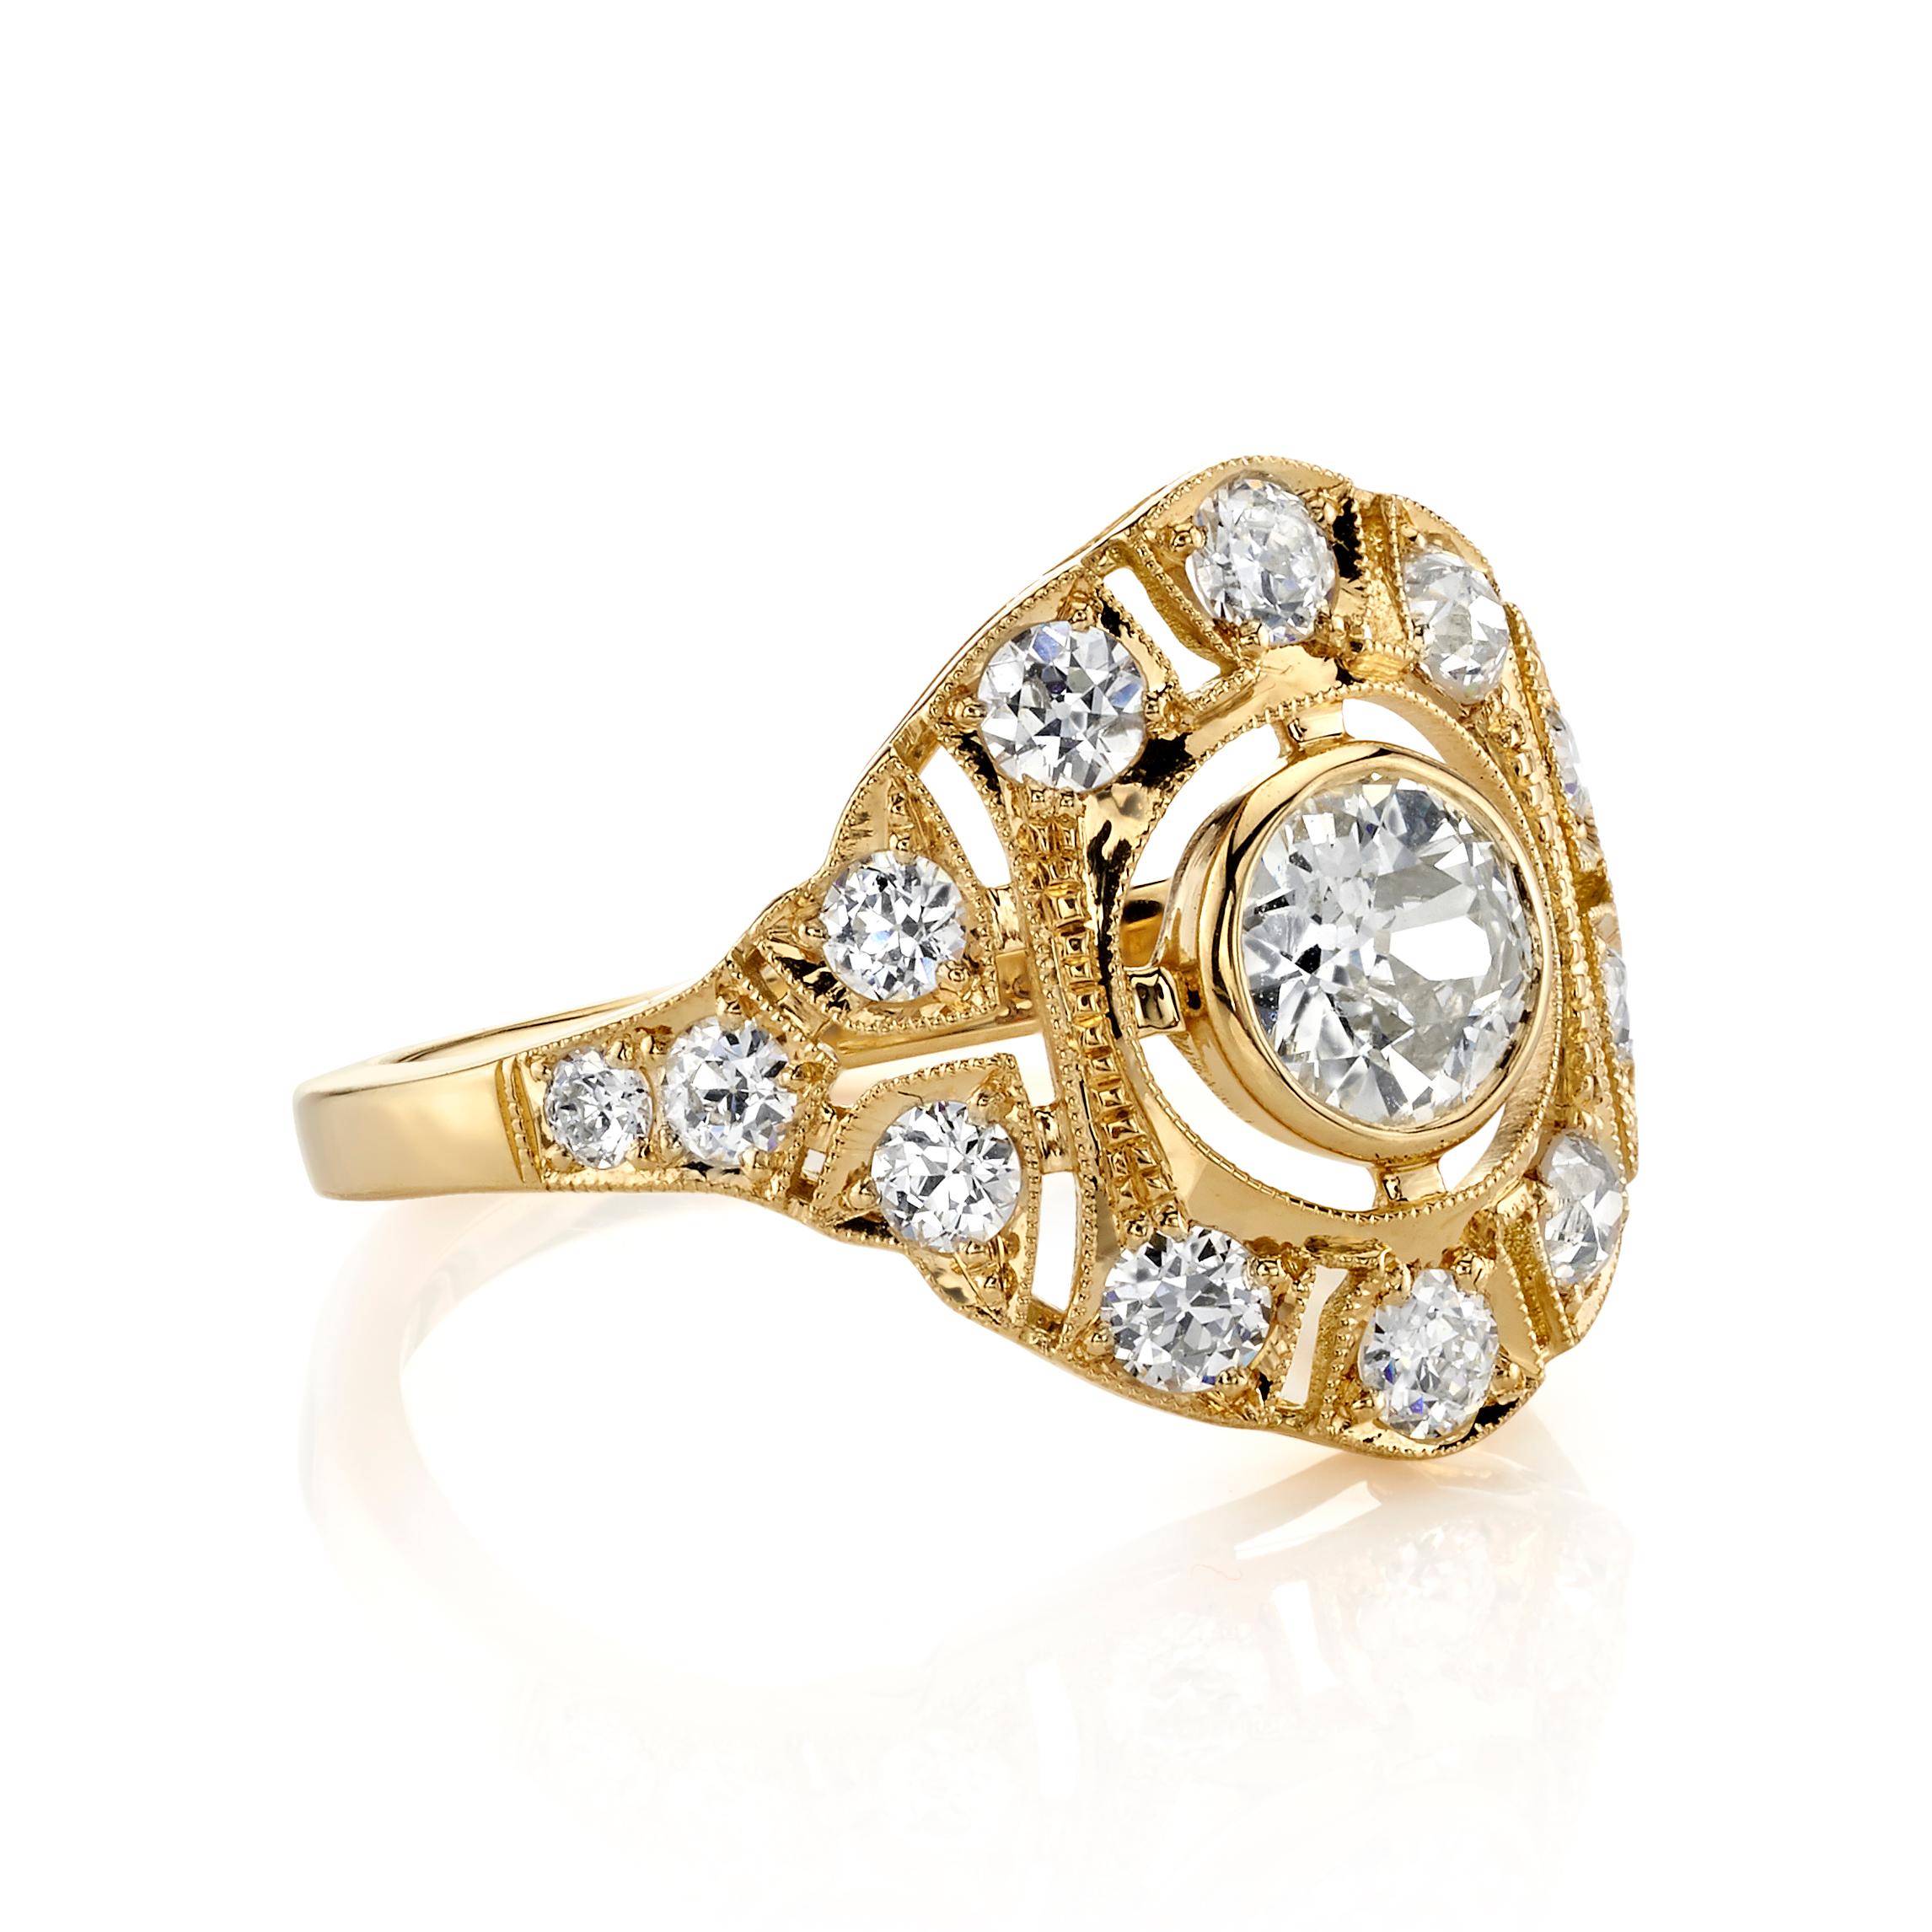 0.50ct I/VS2 EGL certified old European cut diamond with 0.75ctw diamond accents set in a handcrafted 18K yellow gold mounting. Ring is currently a size 6 and can be sized to fit.